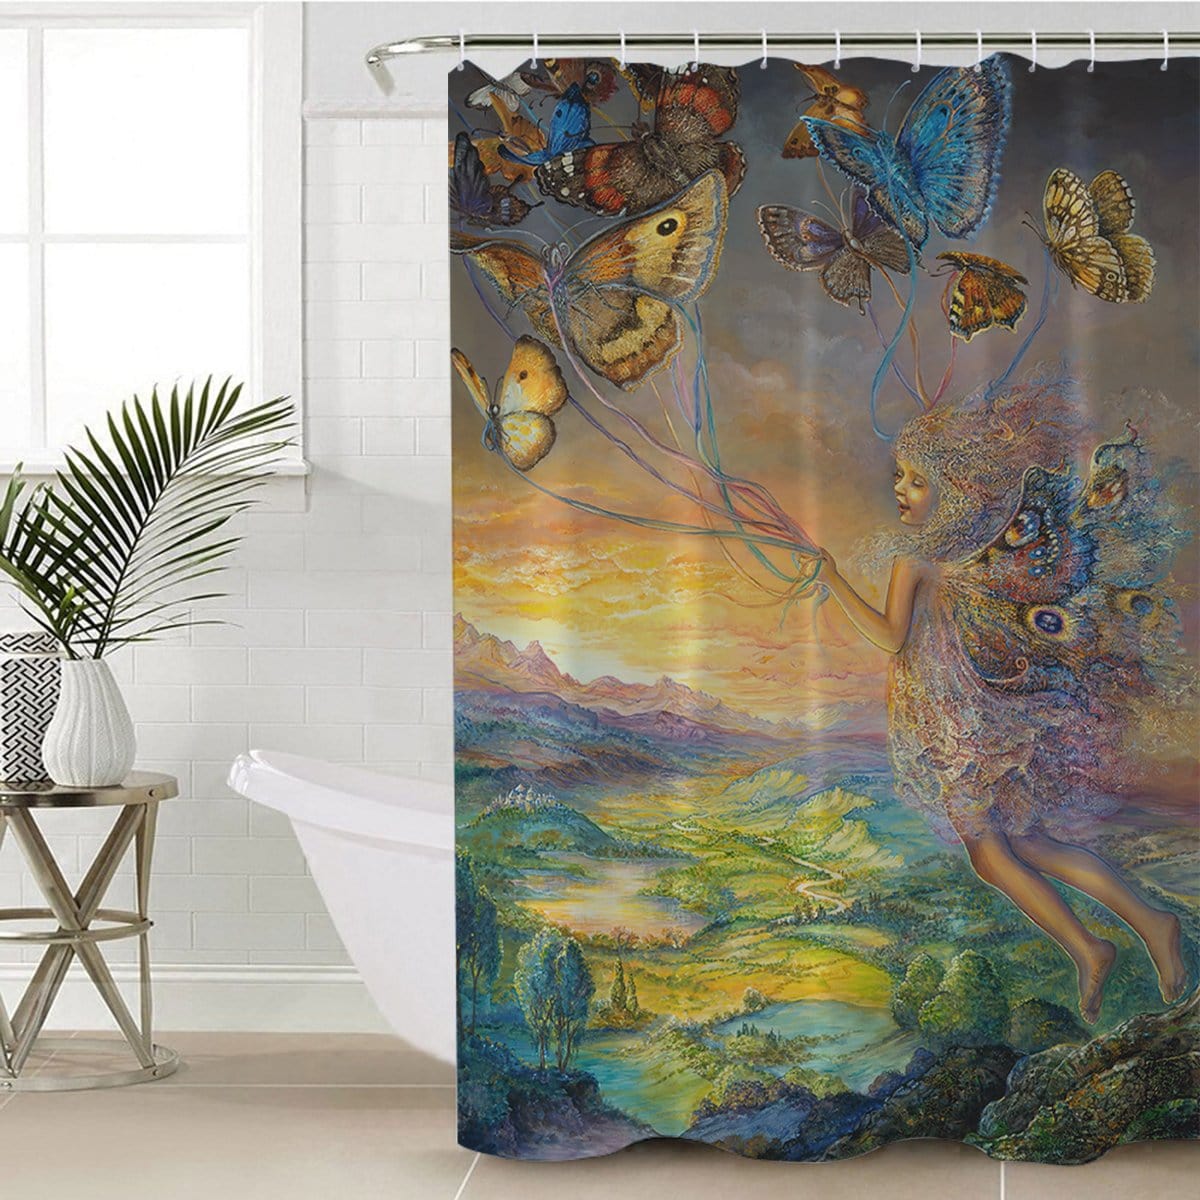 Josephine Wall Up And Away Shower Curtain